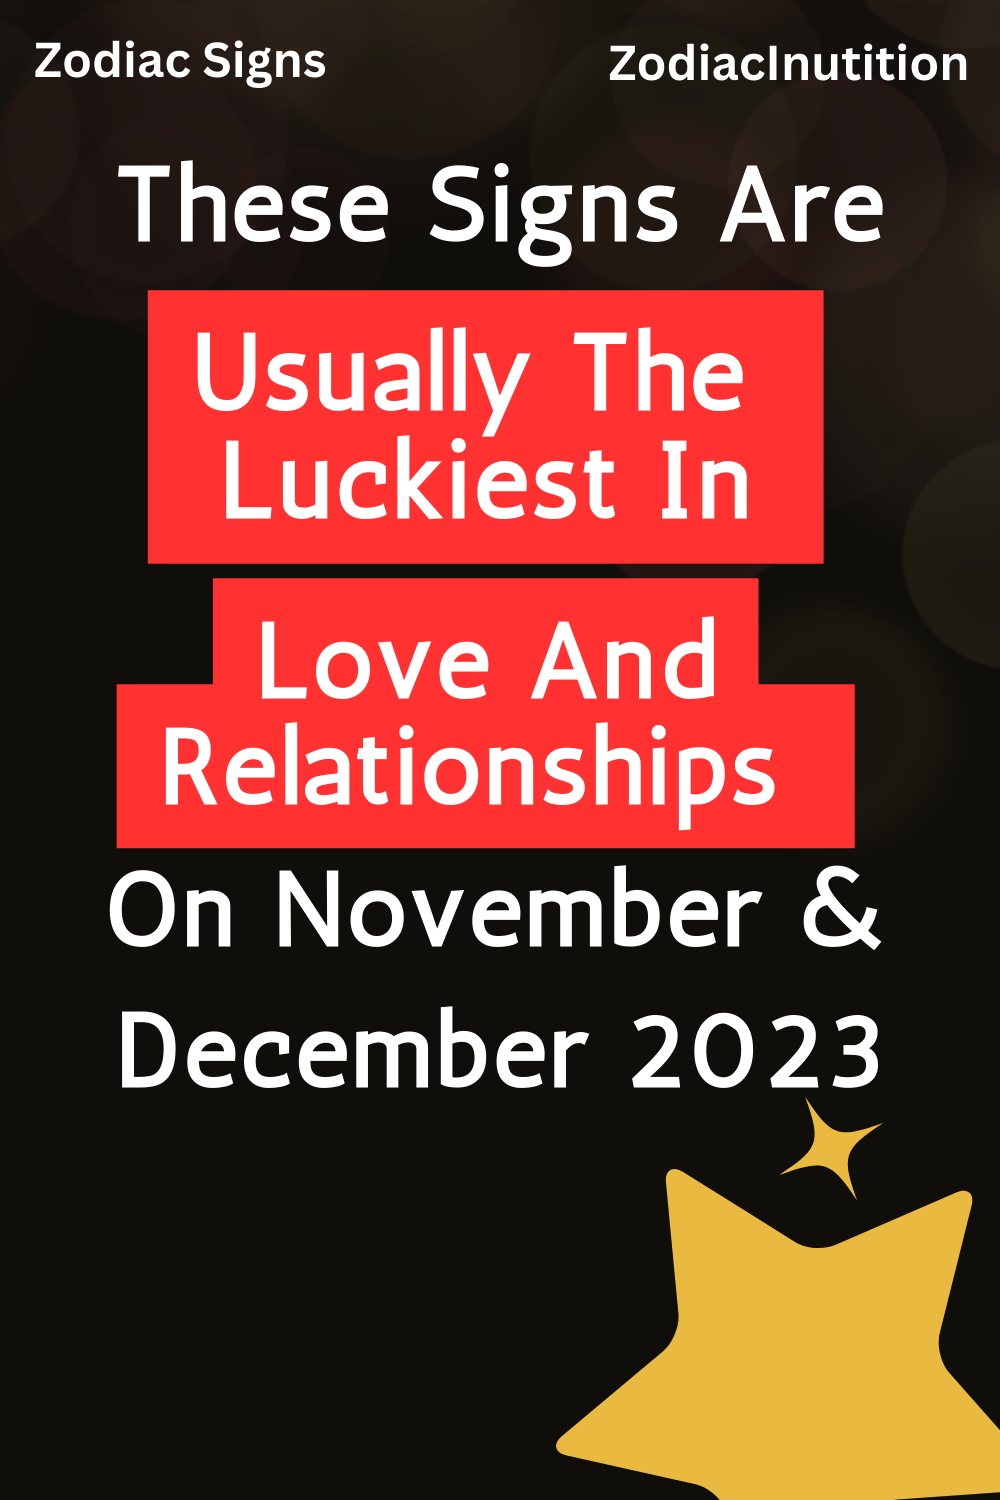 These Signs Are Usually The Luckiest In Love And Relationships On November & December 2023